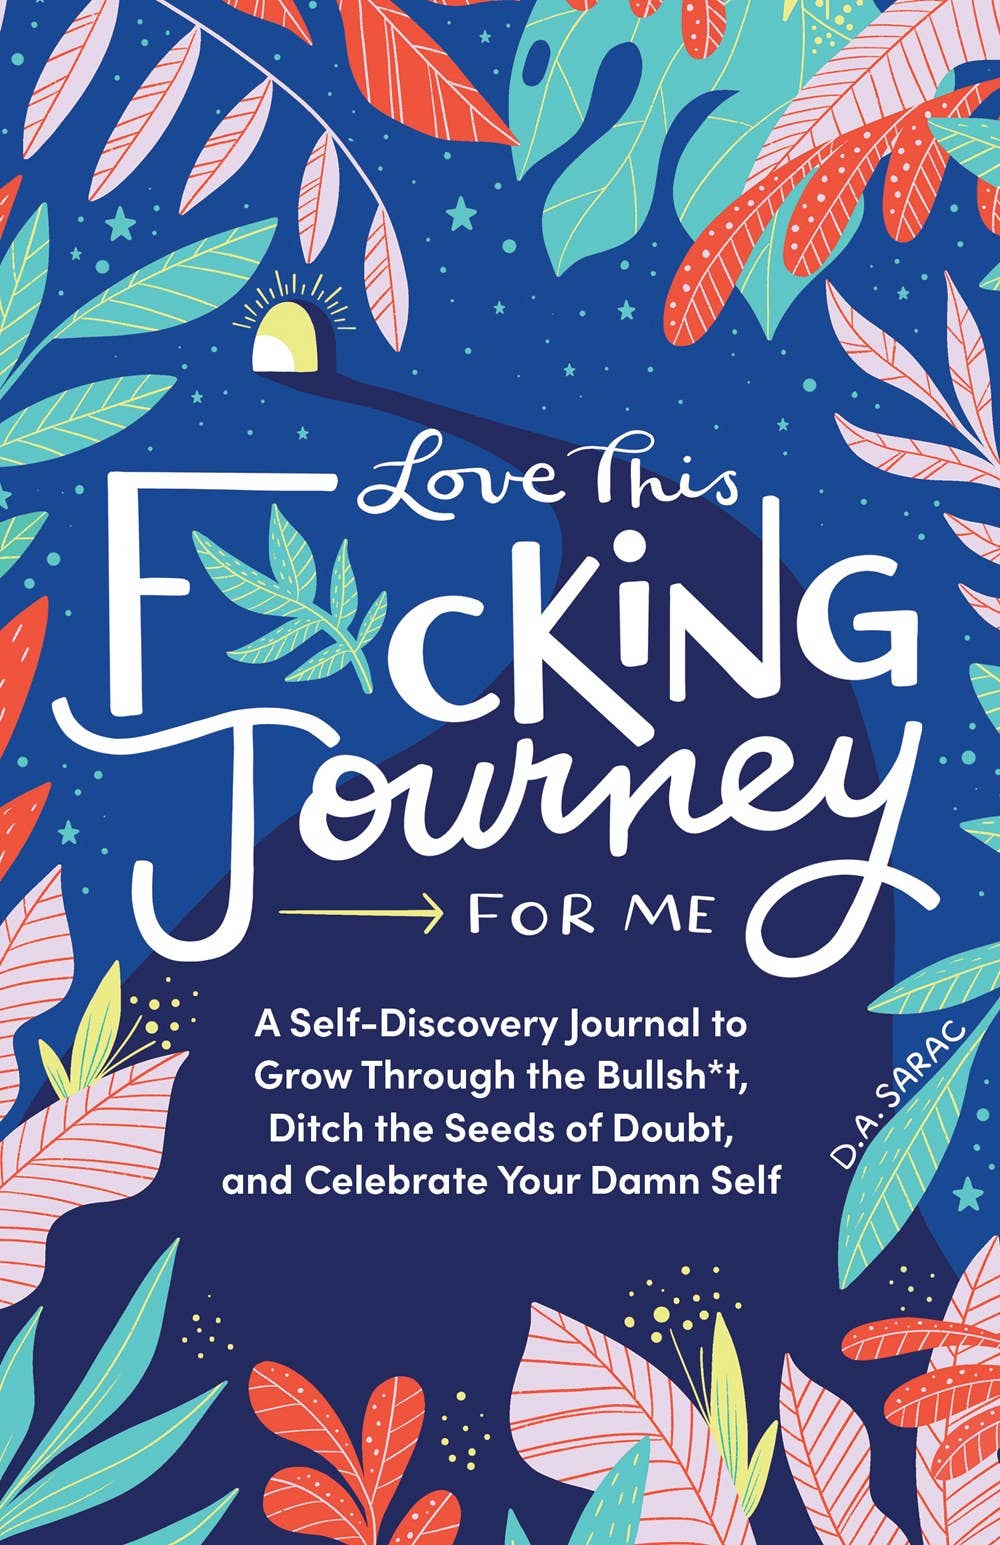 Sourcebooks - Love This F*cking Journey for Me (HC)